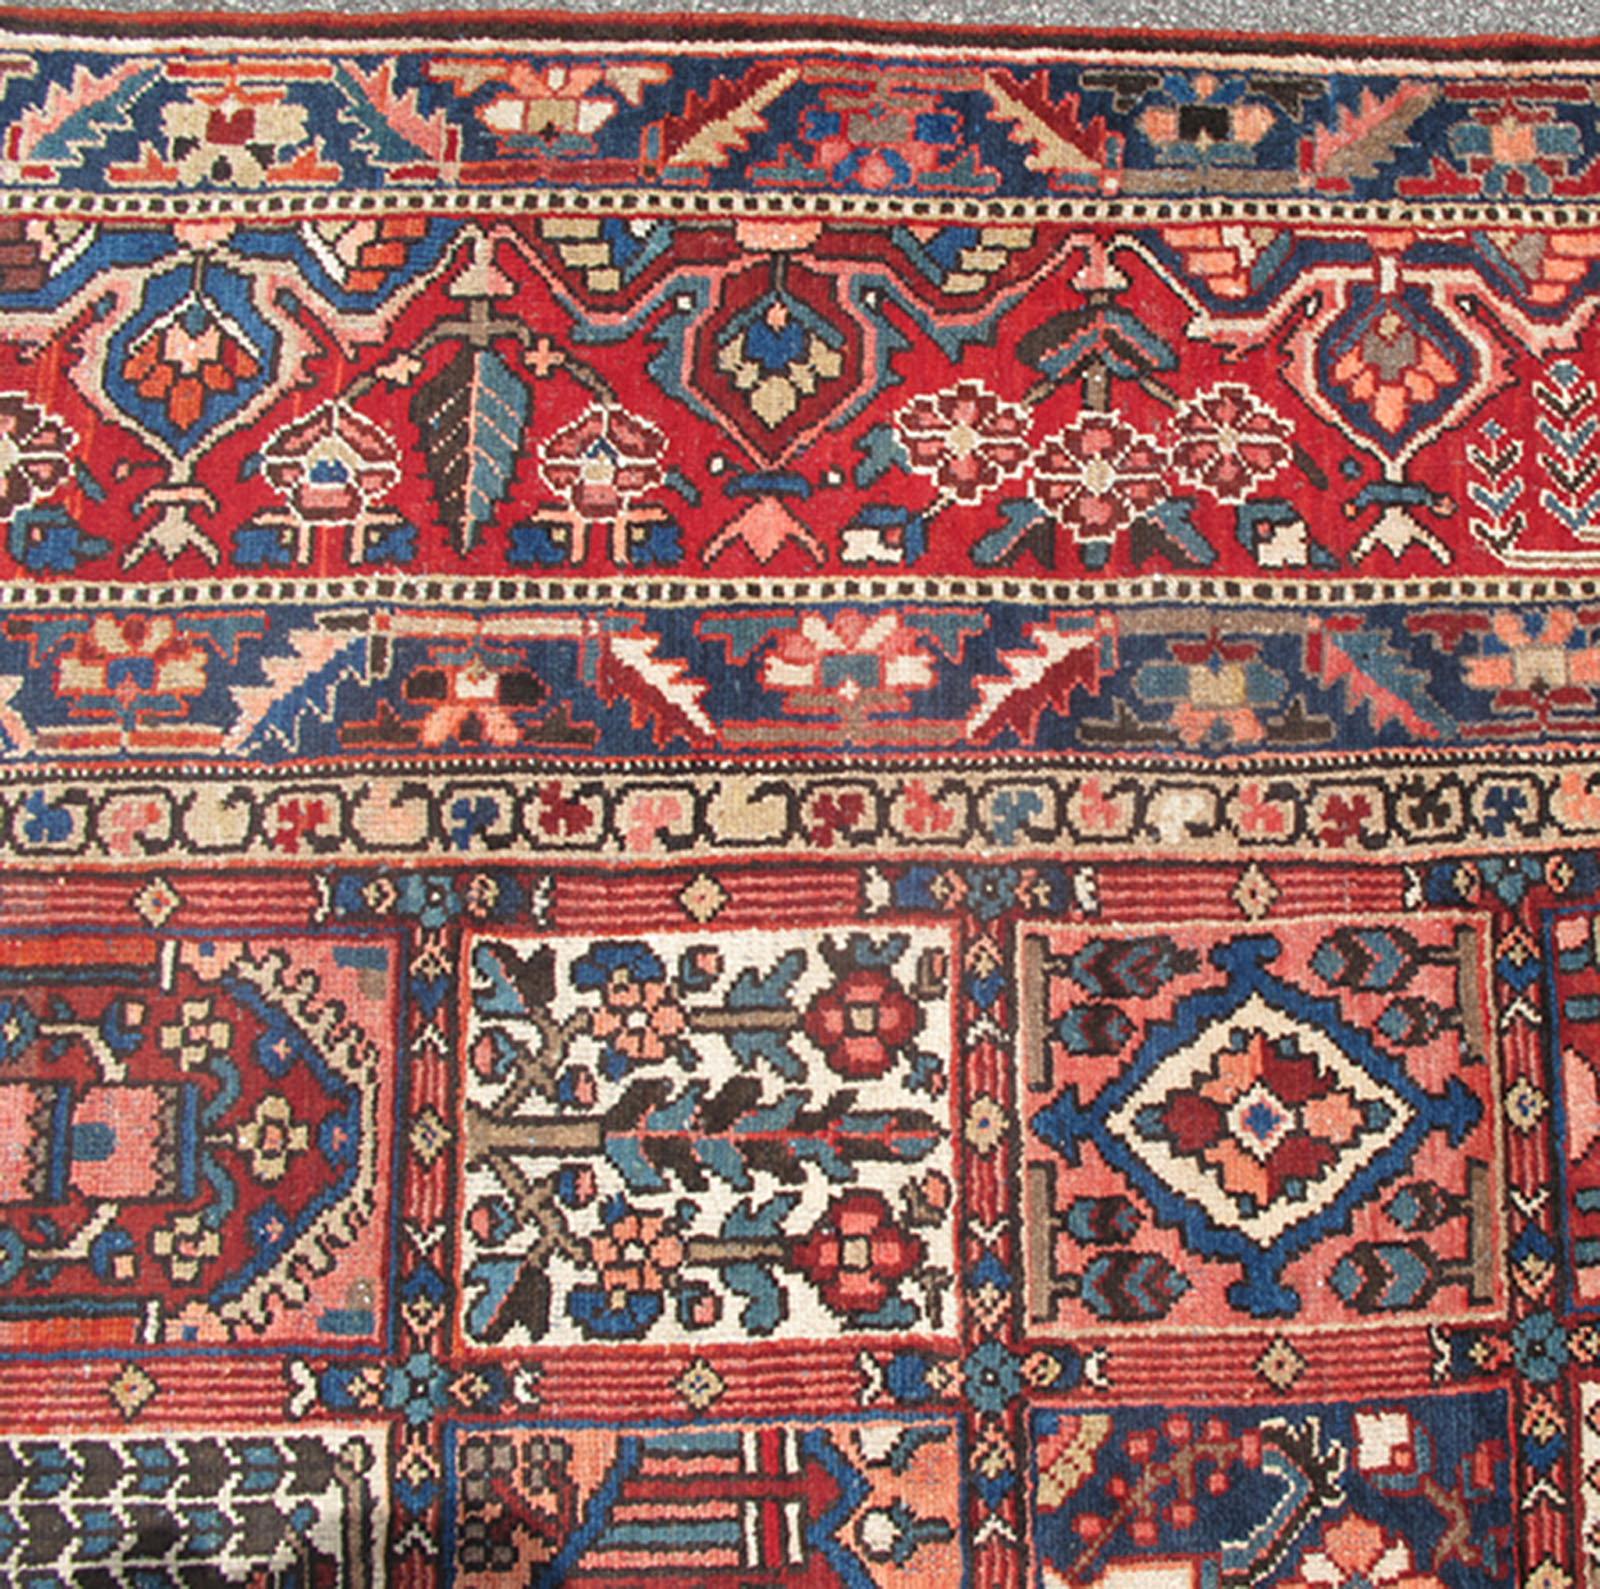 Large Persian Bakhtiari rug with all-over garden design, rug DSP-MR340SK, country of origin / type: Iran / Bakhtiari, circa 1930

This stunning colorful antique Persian Bakhtiari carpet features an incredible tiered display of Sub-geometric